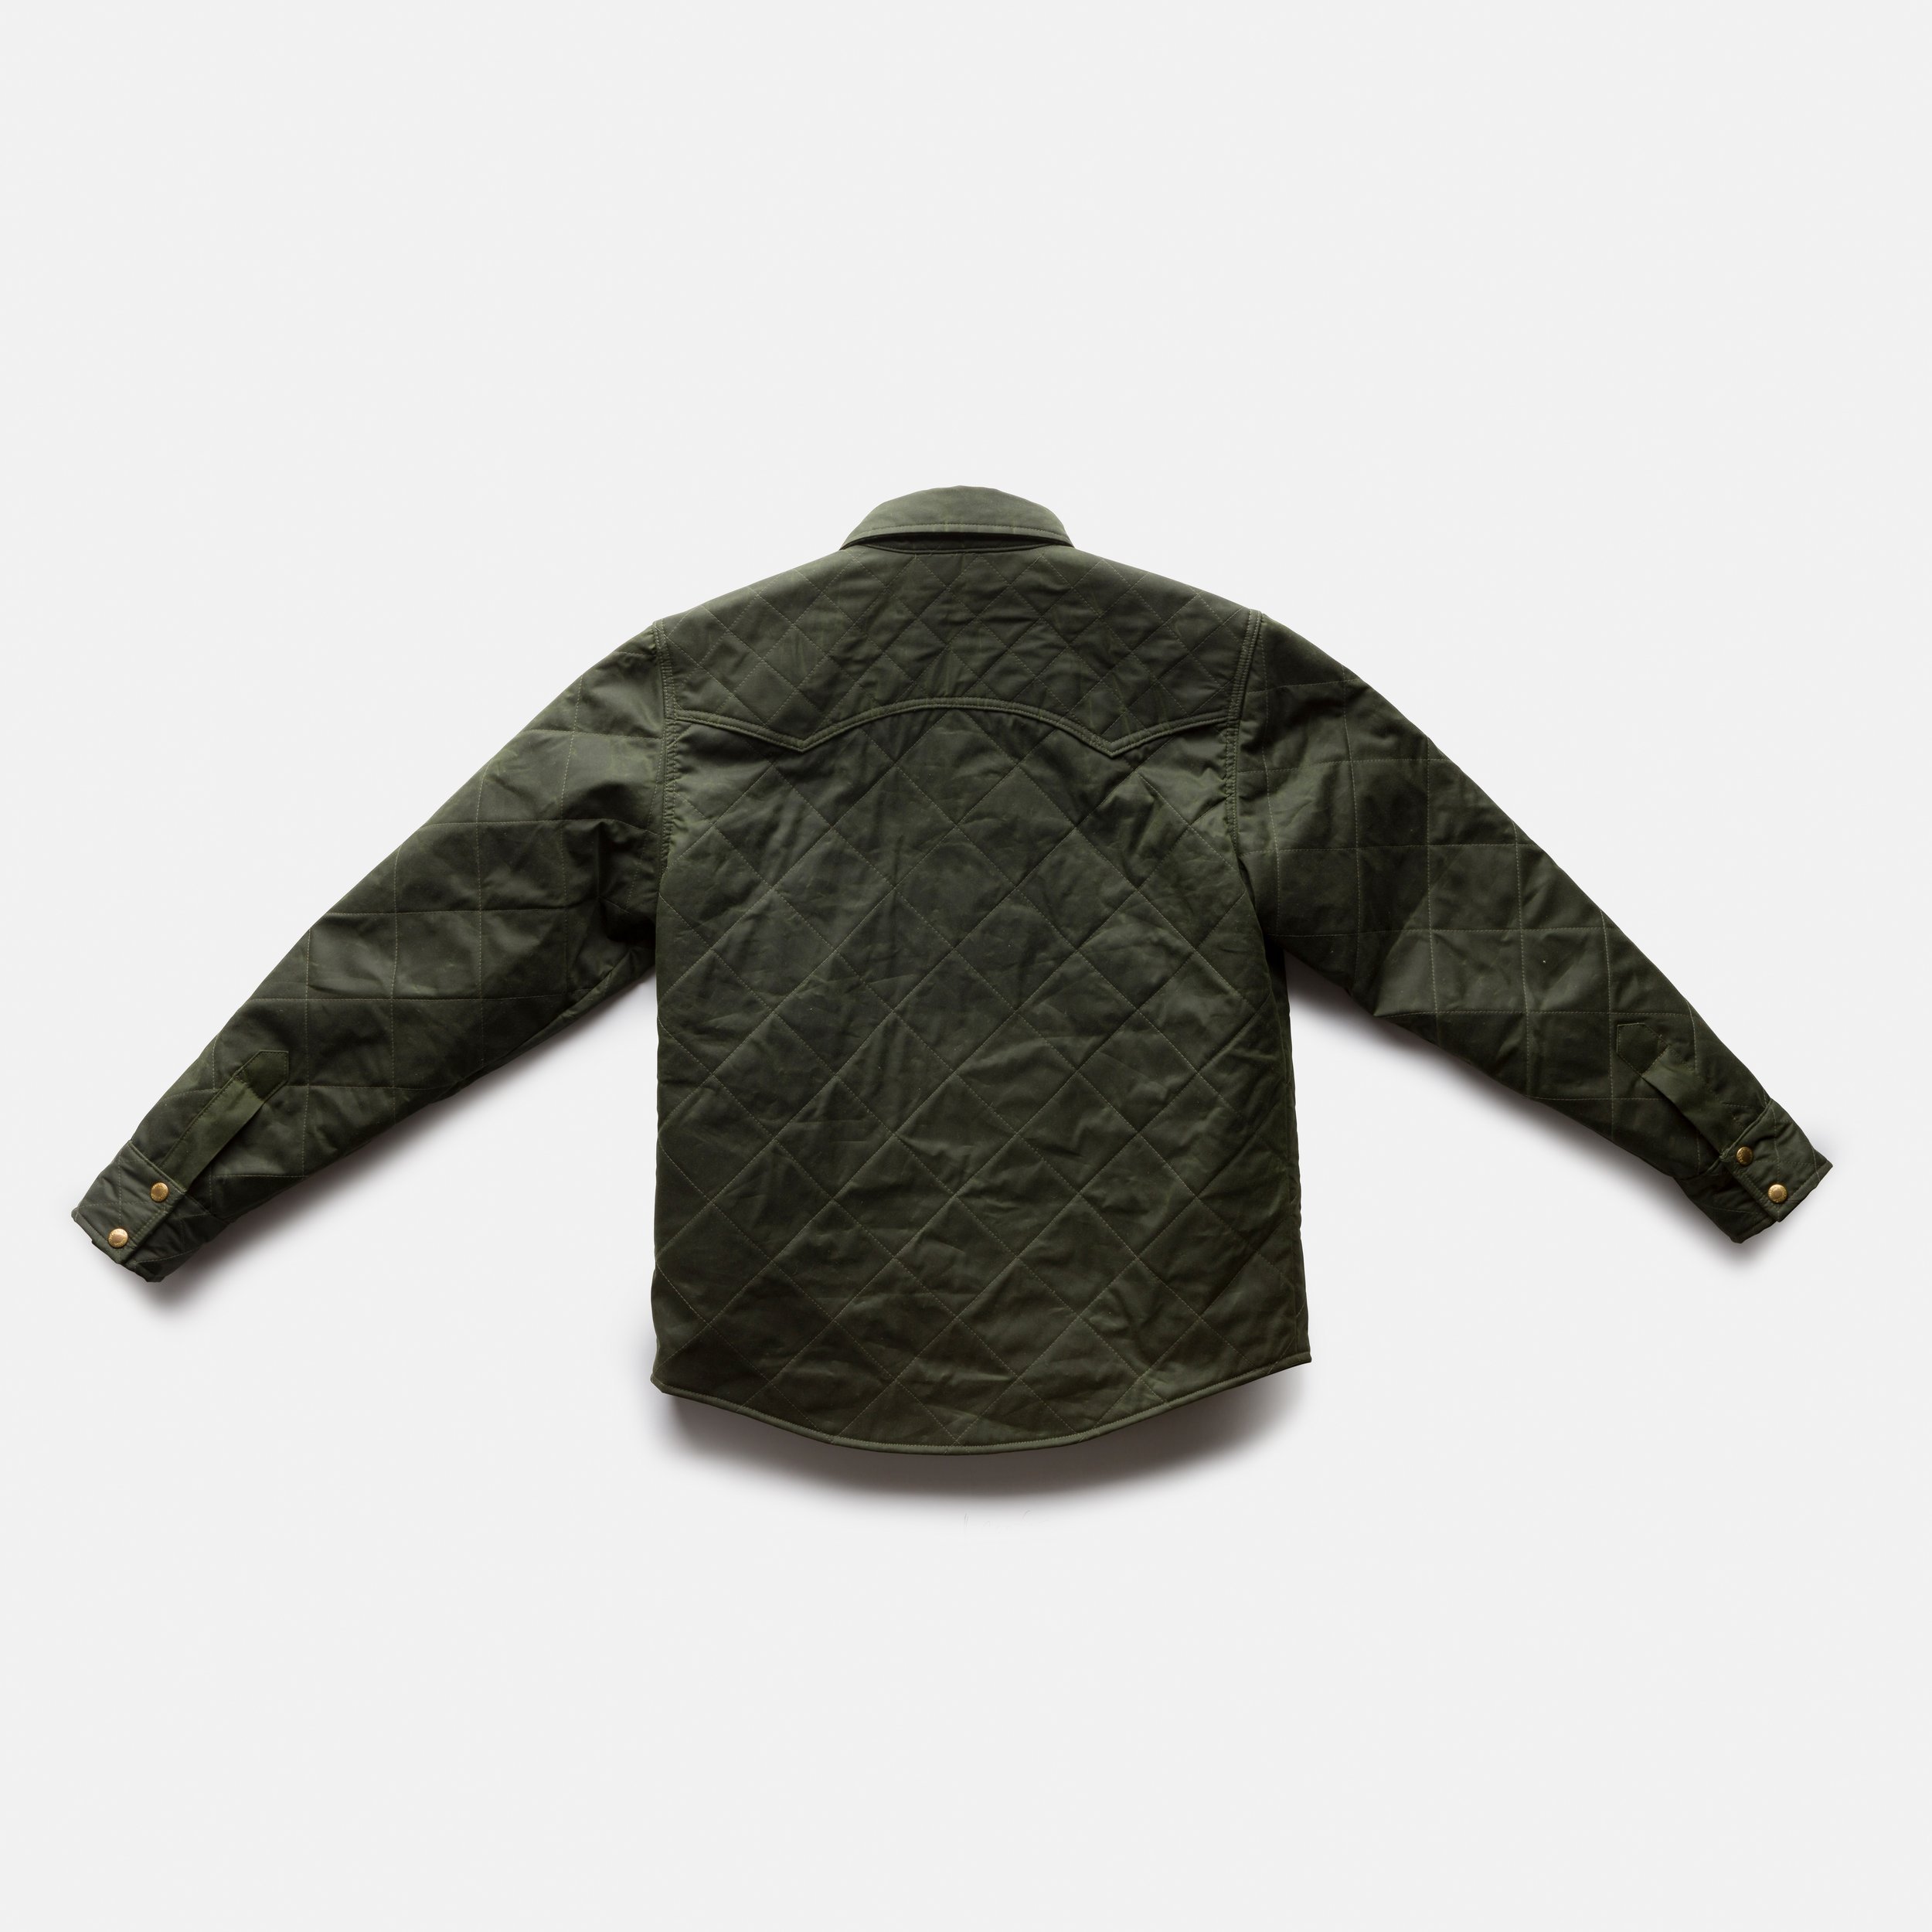 The Ultimate Wax Canvas Jacket by Black Bear Brand.